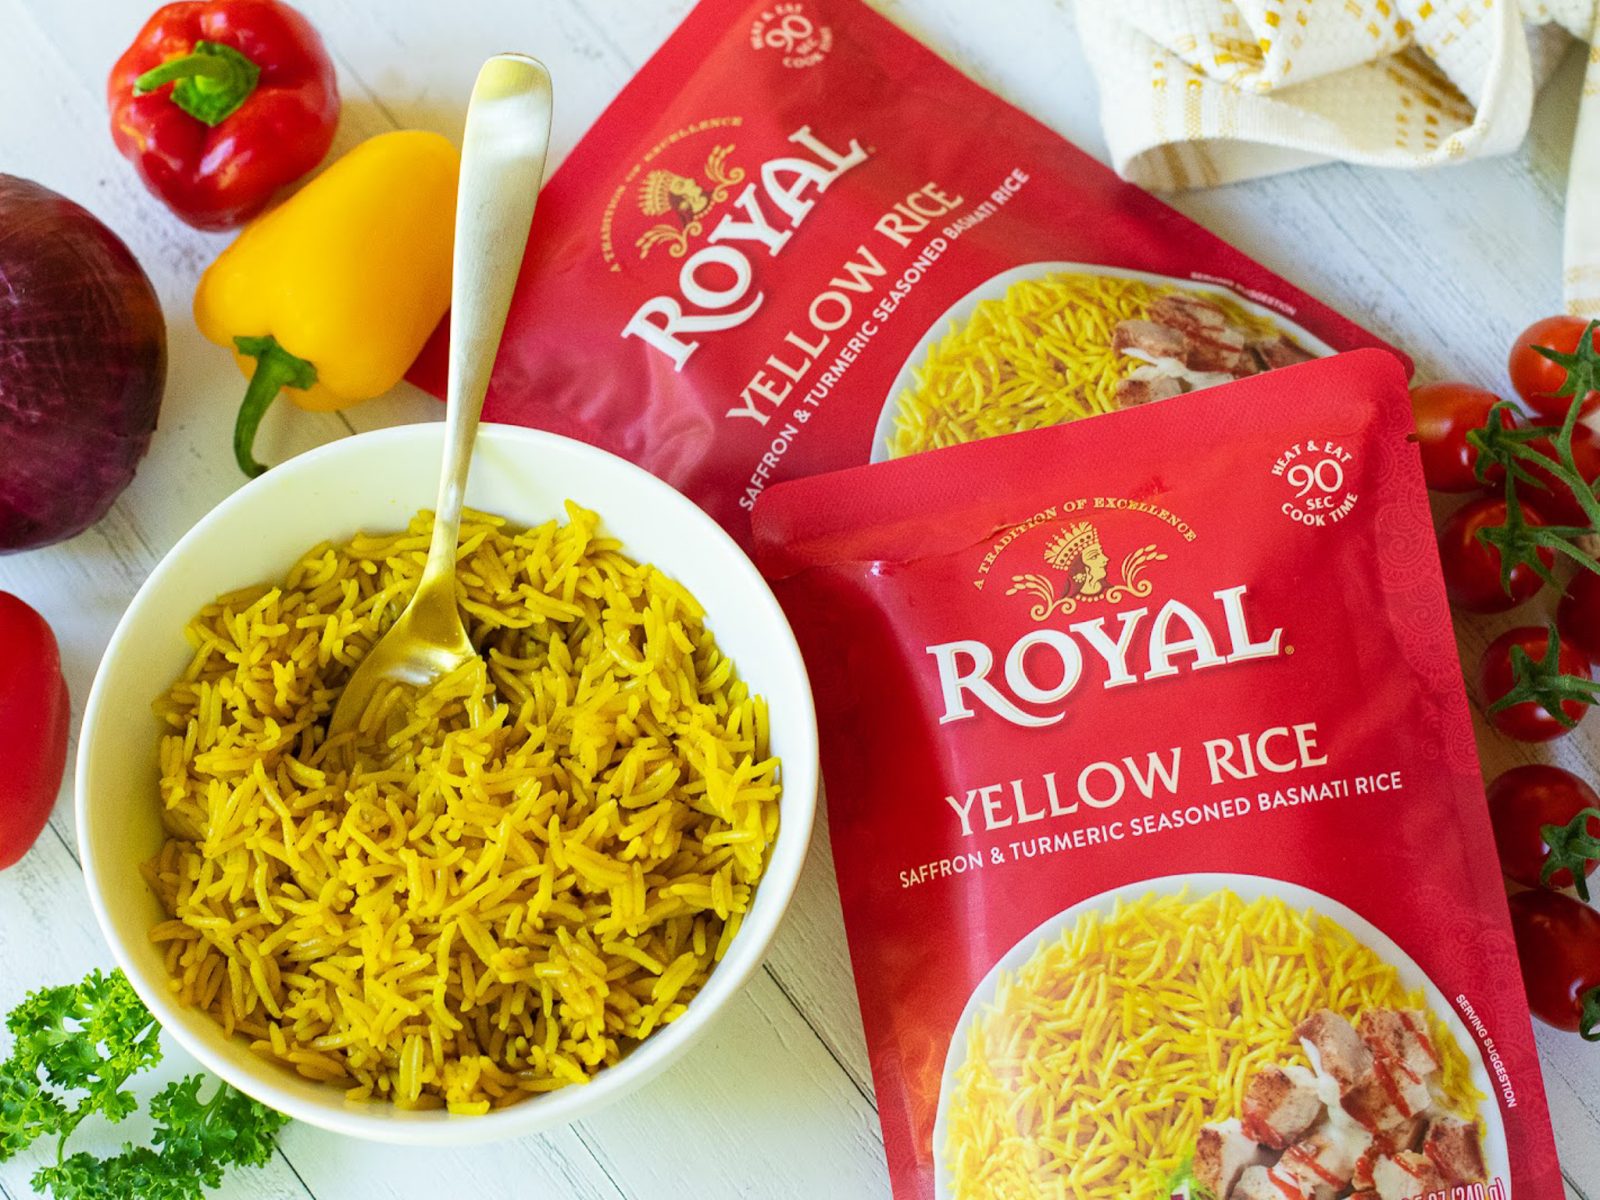 Get Royal Ready To Heat Rice As Low As $1 At Kroger